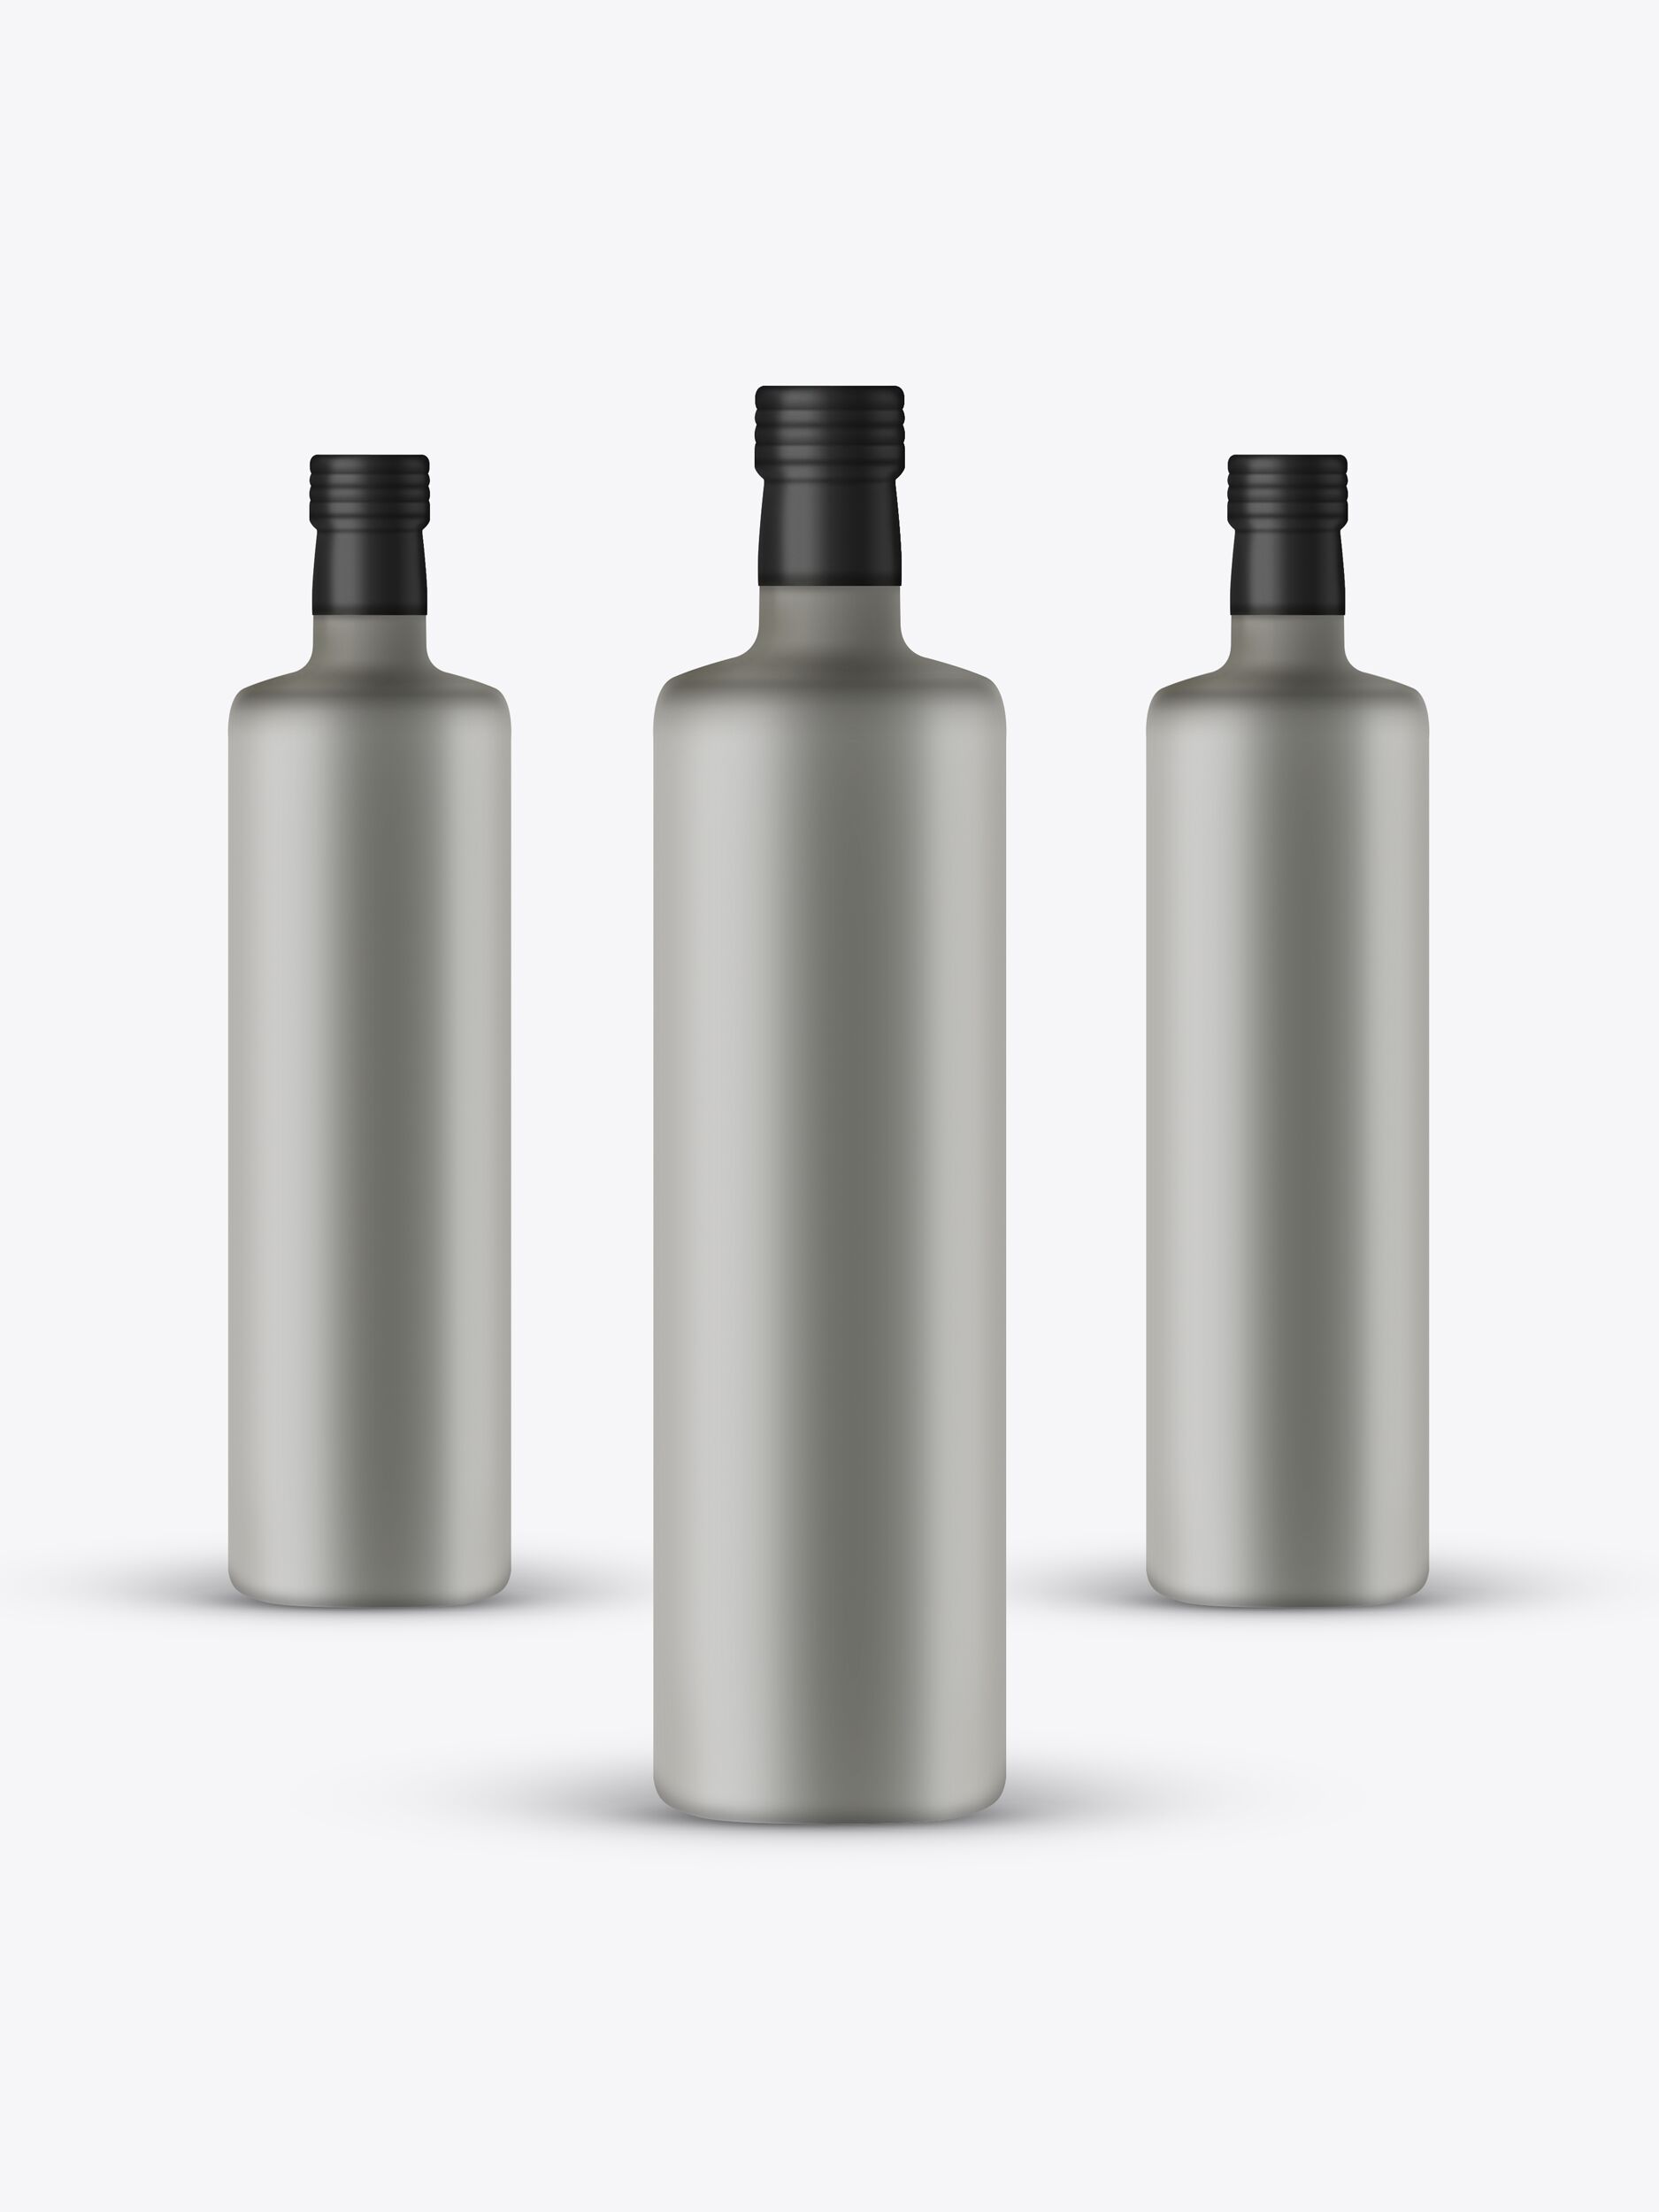 Front View Mockup Featuring Three Tall Ceramic Bottles FREE PSD